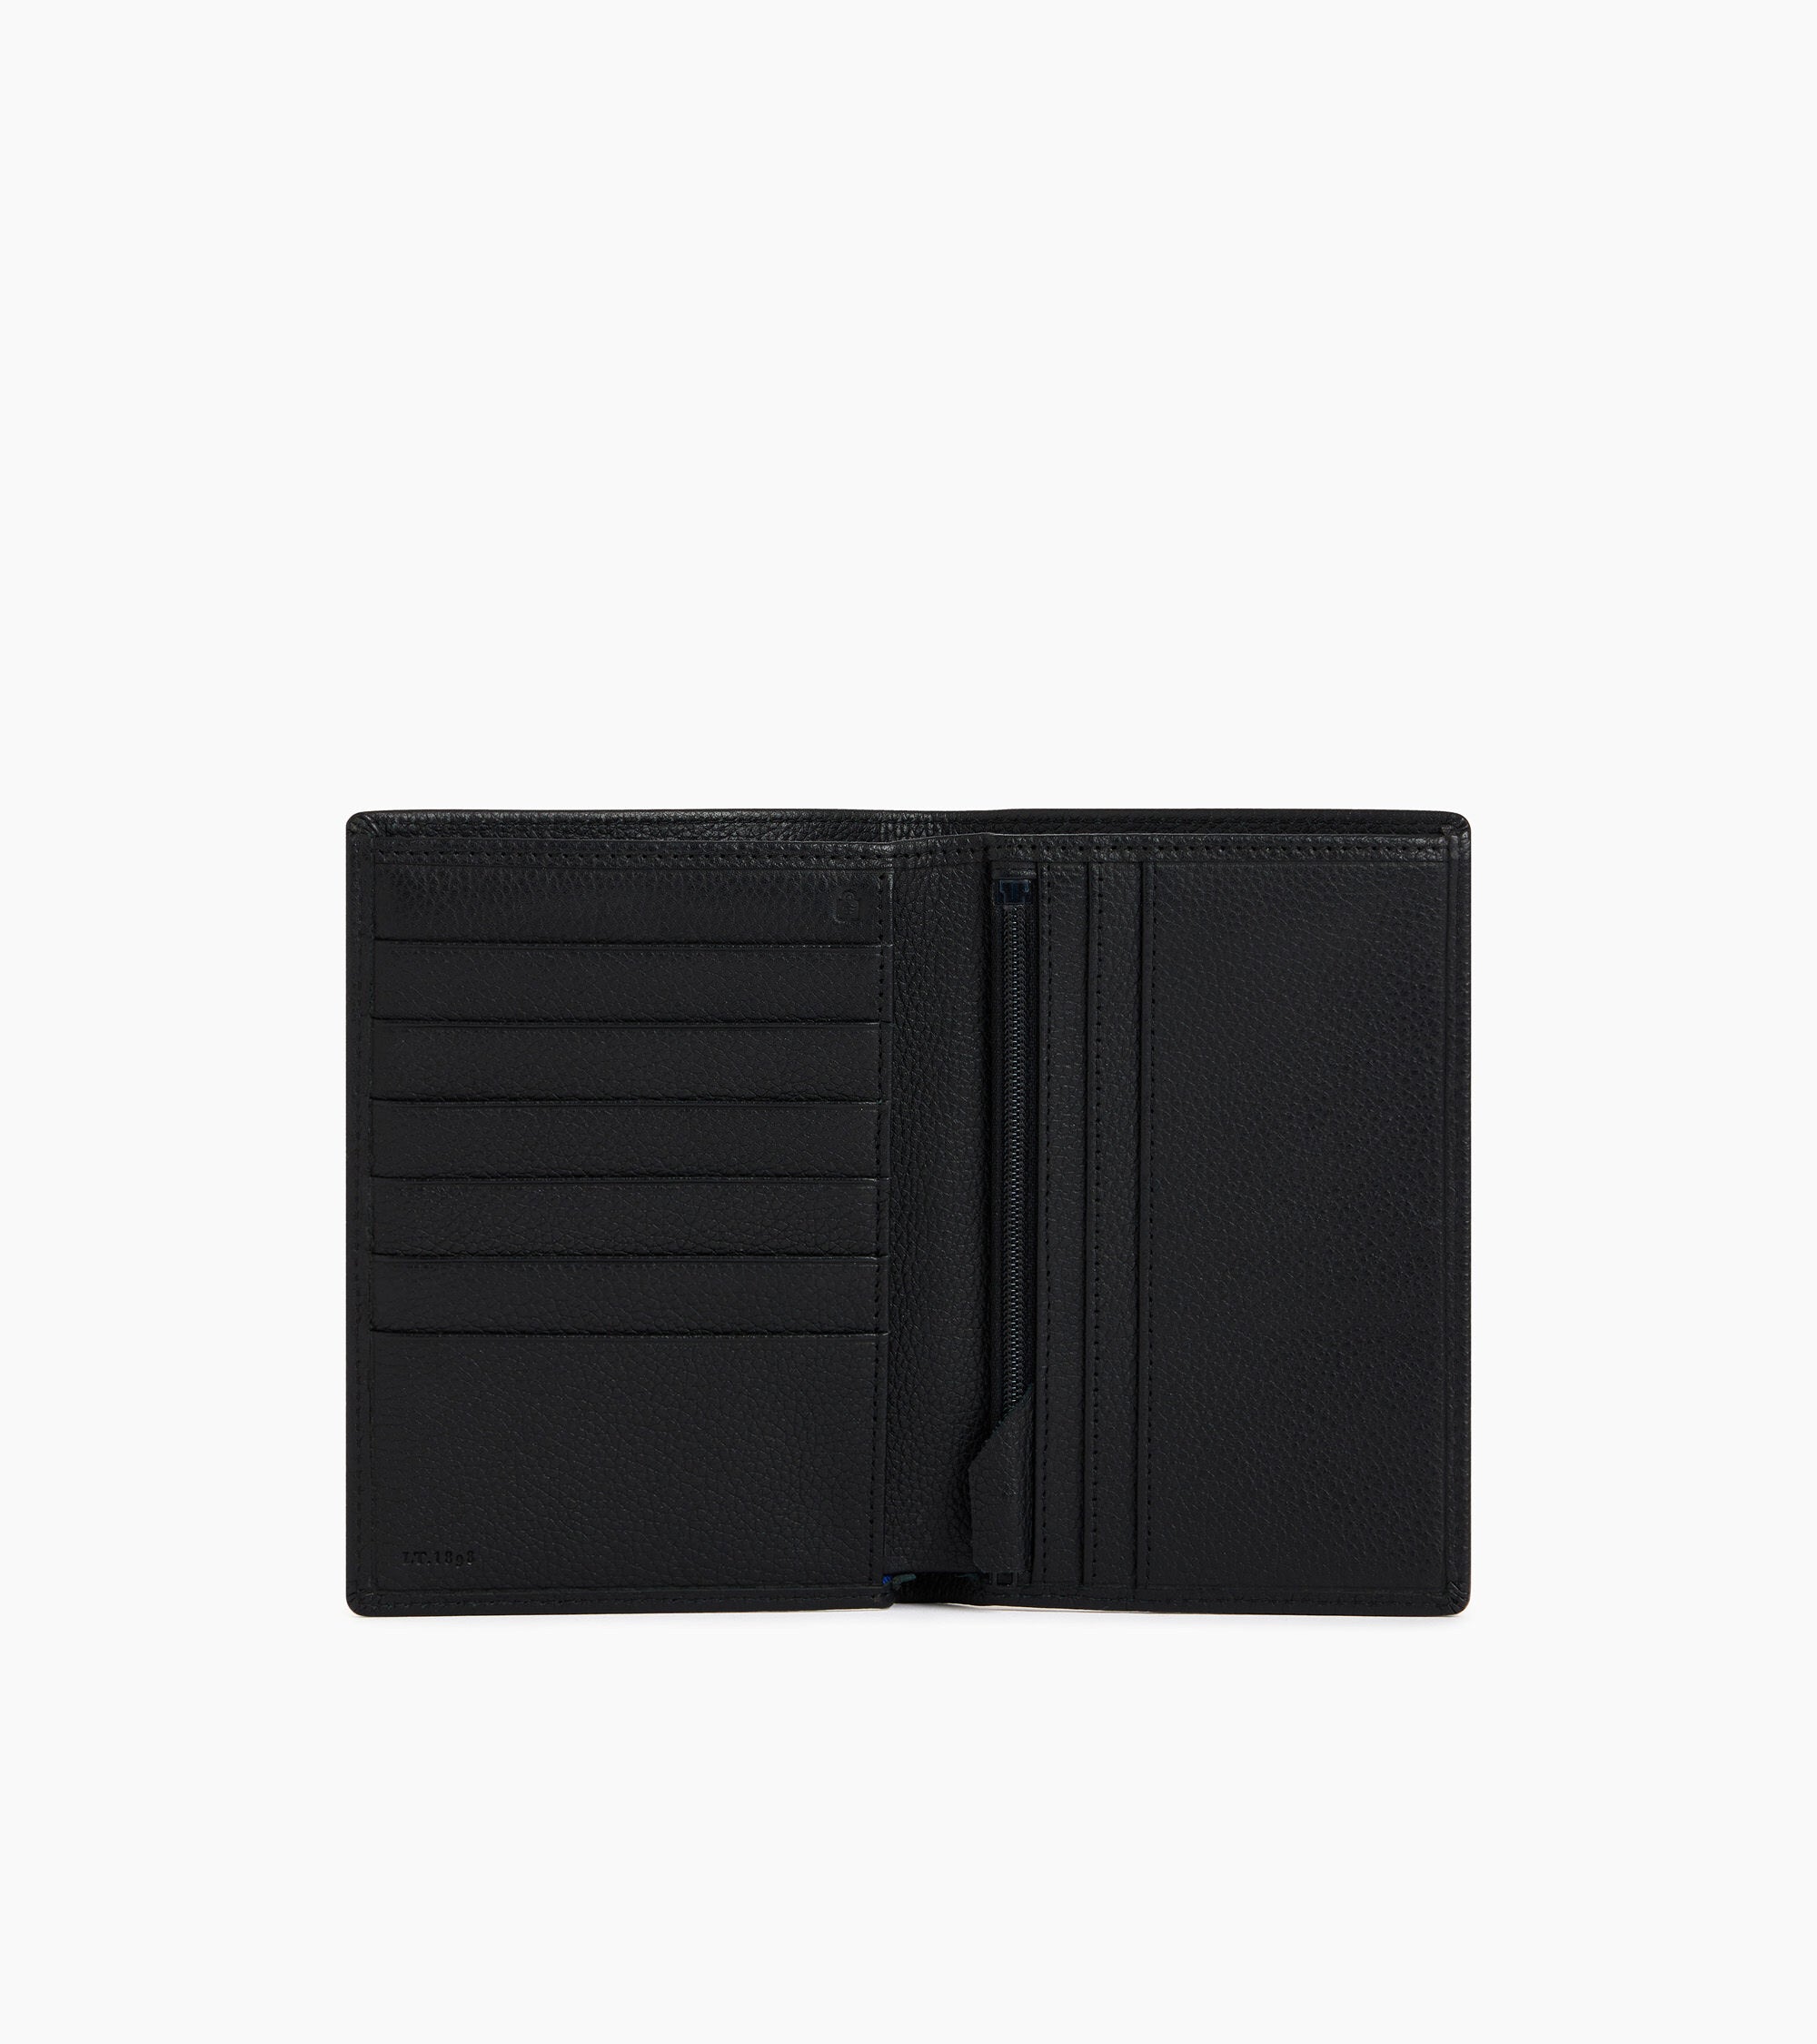 Zipped pocket Charles pebbled leather wallet